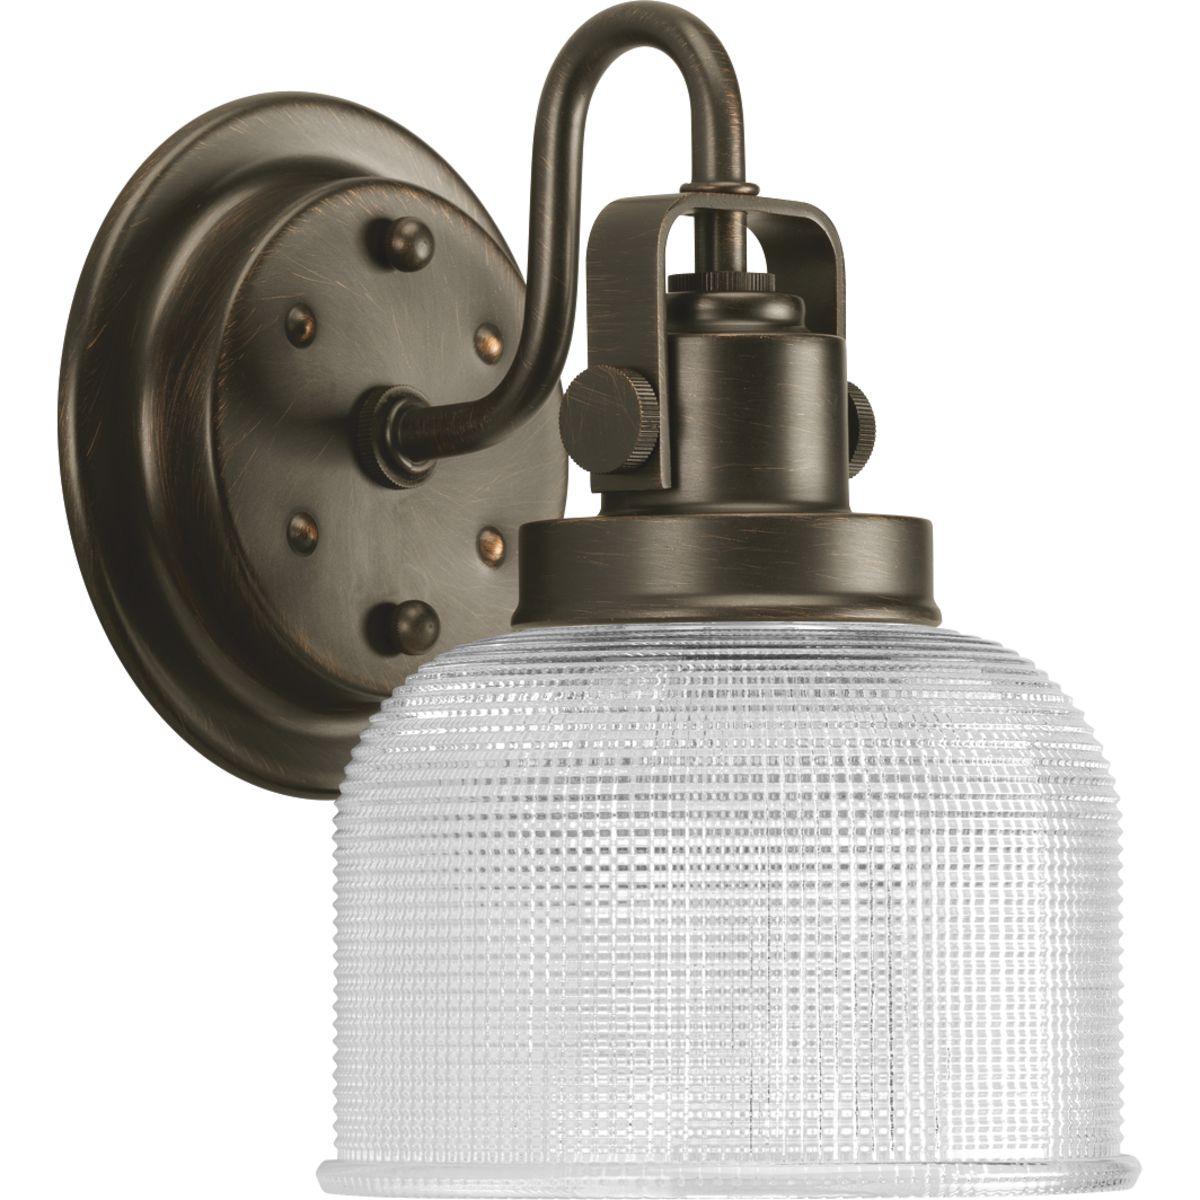 Hubbell P2989-74 Archie is a standout in any room and provides a fun and fashionable way to light your home. The authentic, prismatic style glass shade diffuses light to provide functional and stylish illumination. Finely crafted strap and knob details are conveyed by the